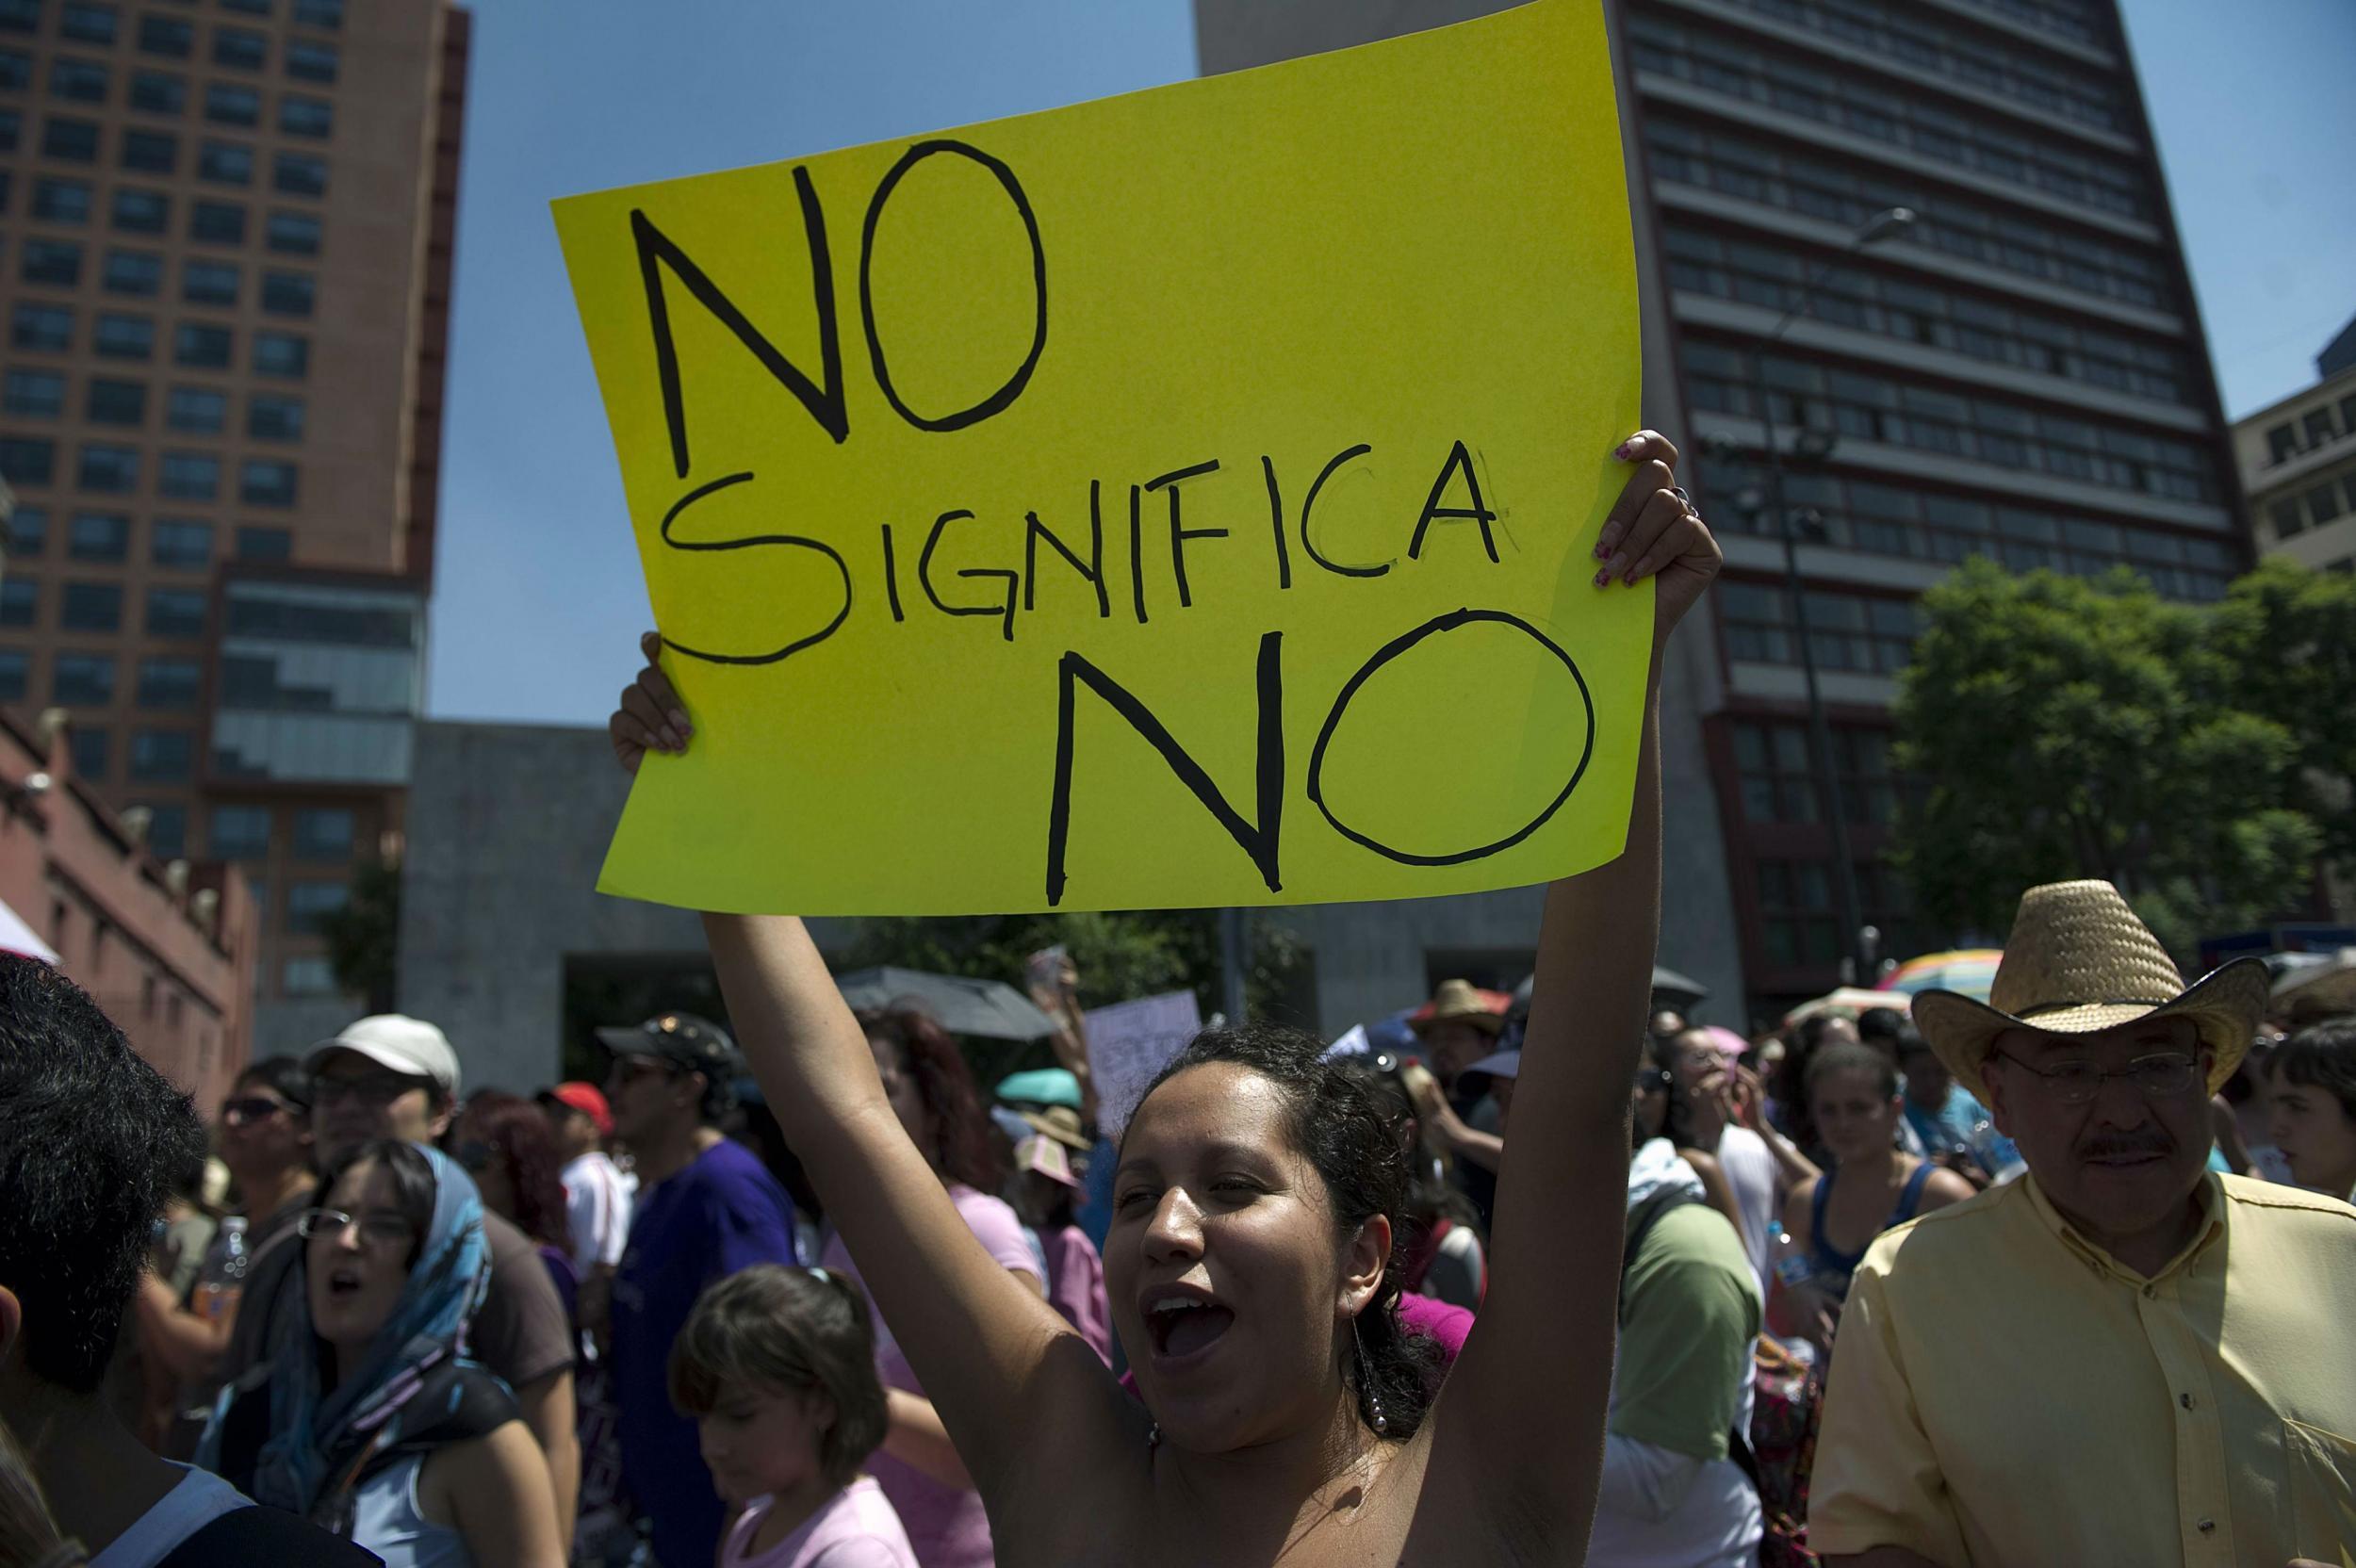 Protesters in Mexico City say 'No means no' when it comes to consent